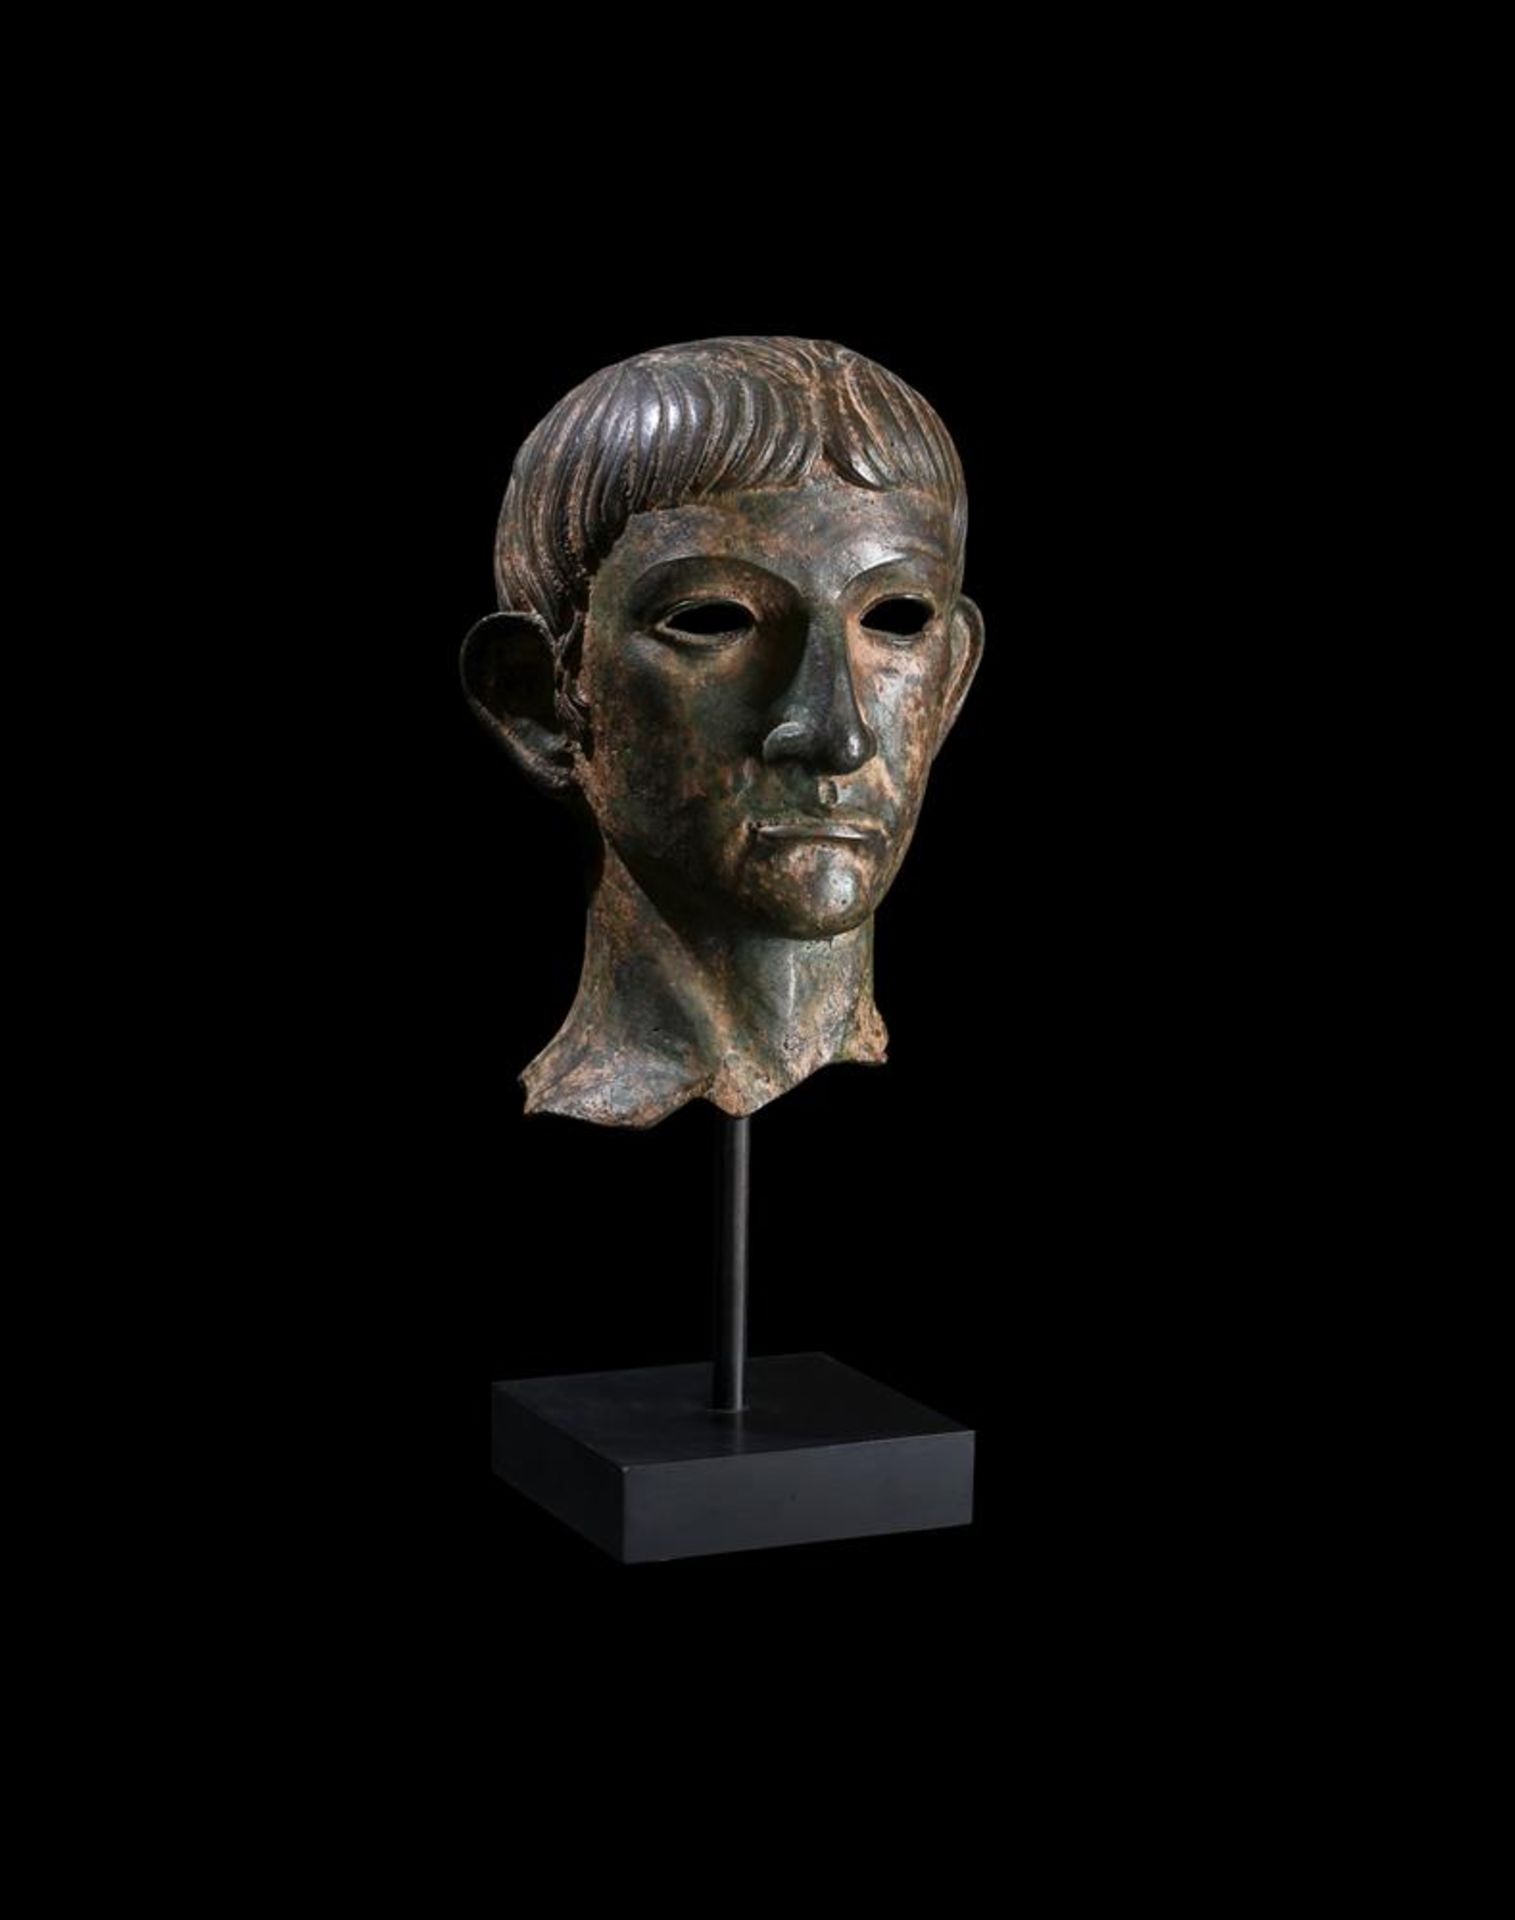 AFTER THE ANTIQUE, A BRONZE BUST OF THE EMPEROR CLAUDIUS, PROBABLY 20TH CENTURY